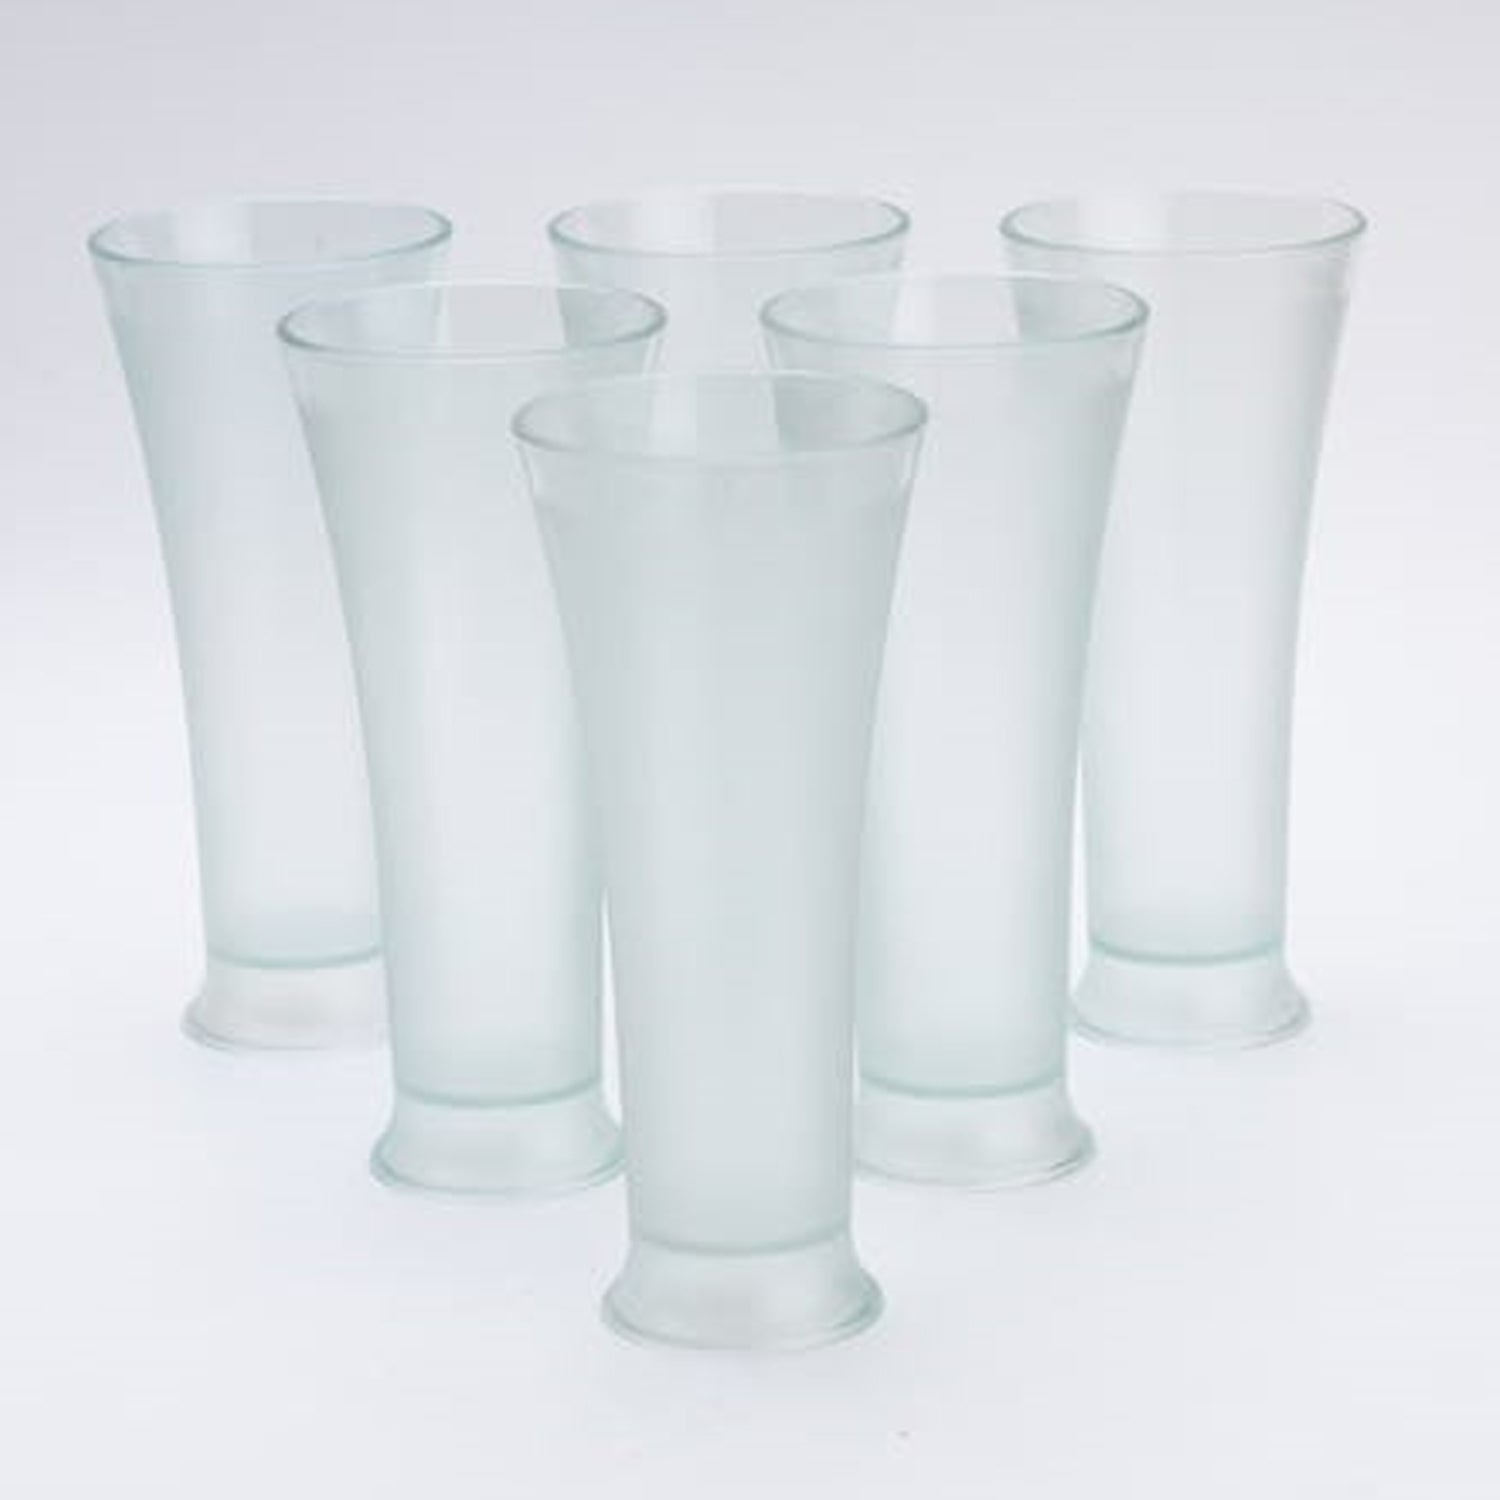 8219 High Quality Faluda, ice cream, Juicer and Water Glasses Set of 6 Transparent, Drinking Water Glasses Stylish Glasses for Faluda, Water, Juice, Glass Set of 6 Pcs (300 ML Approx)